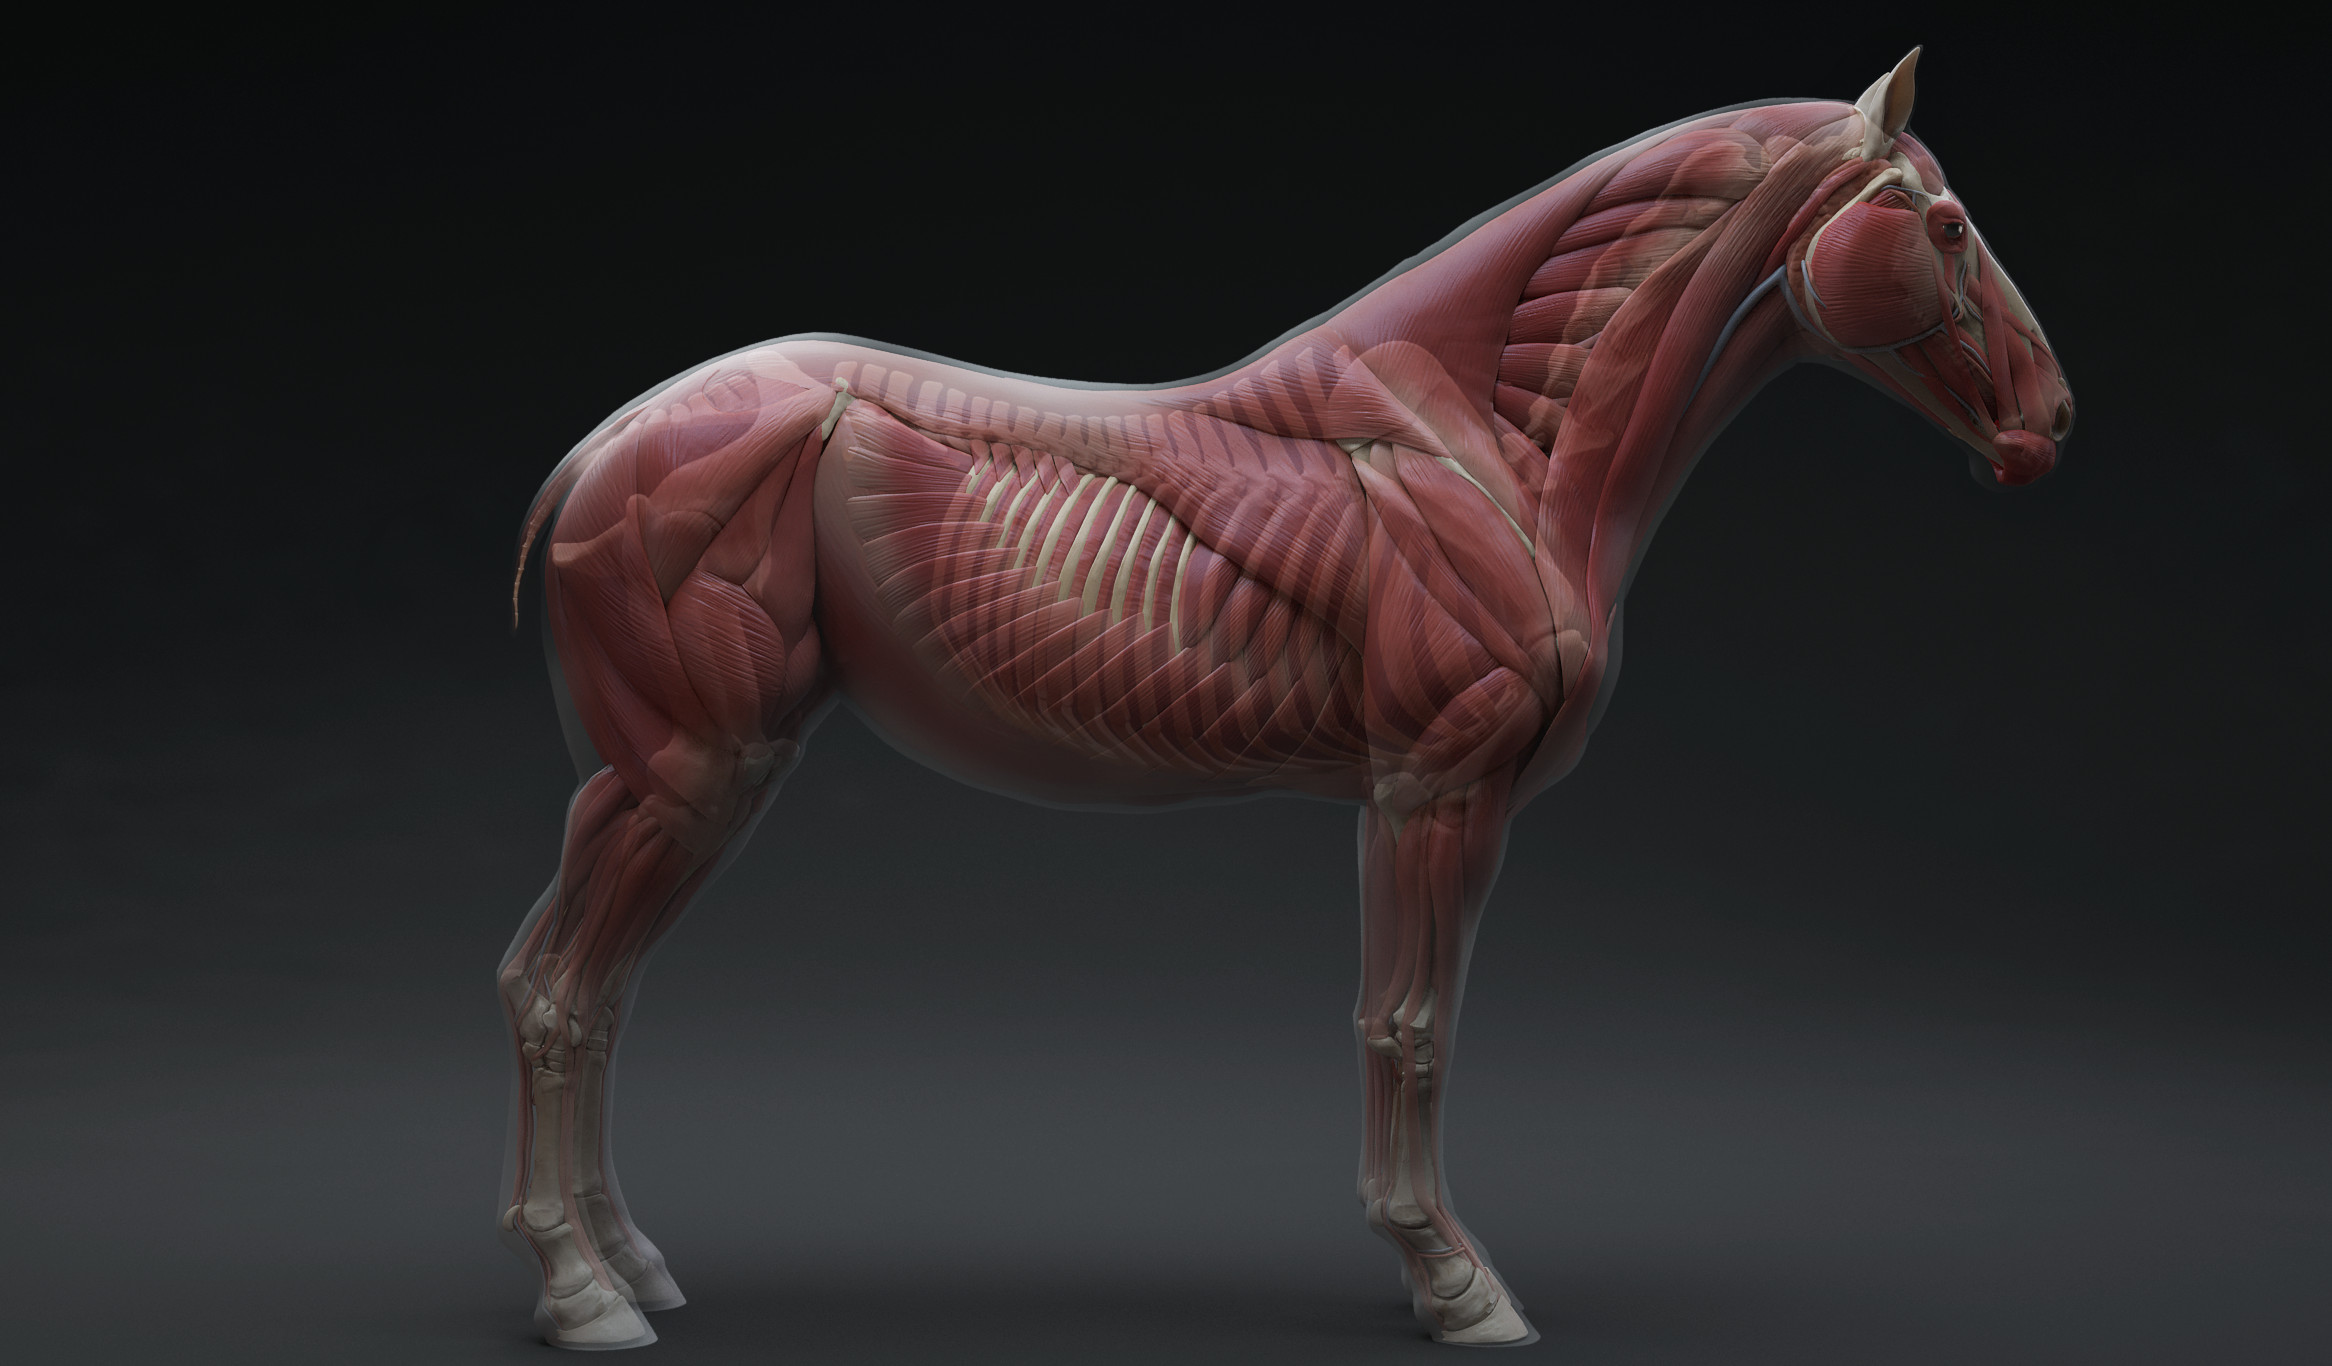 This model is available at -33% at launch! Grab it while you can :) 
https://www.3dscanstore.com/ecorche-3d-models/horse-ecorche-3d-model